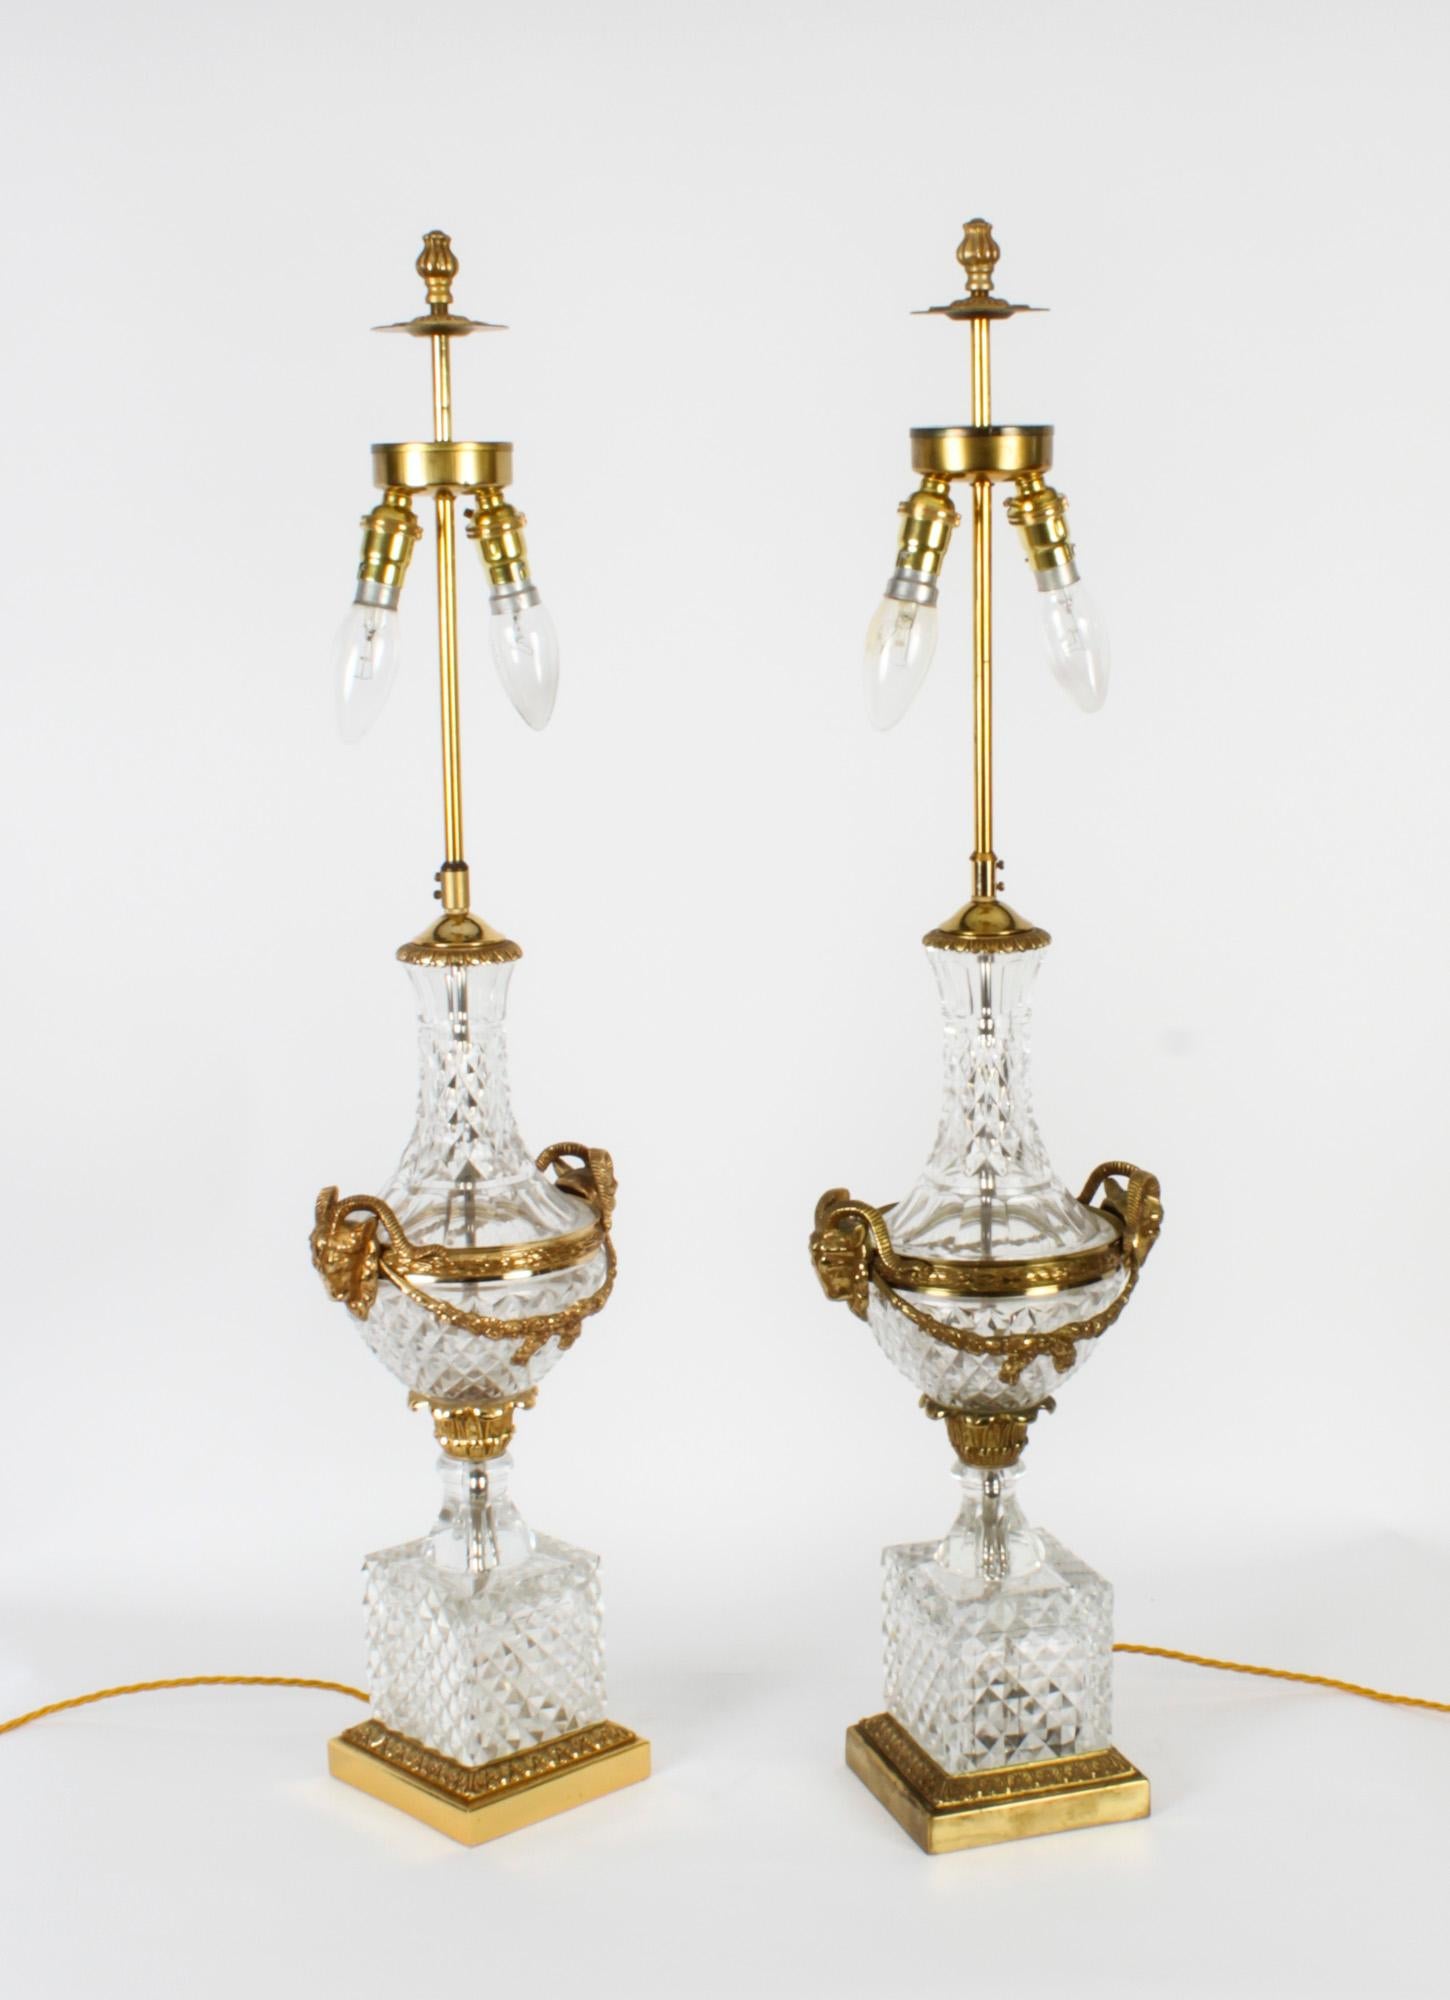 Antique Pair of French Ormolu & Glass Baccarat Table Lamps, Mid 20th C 9